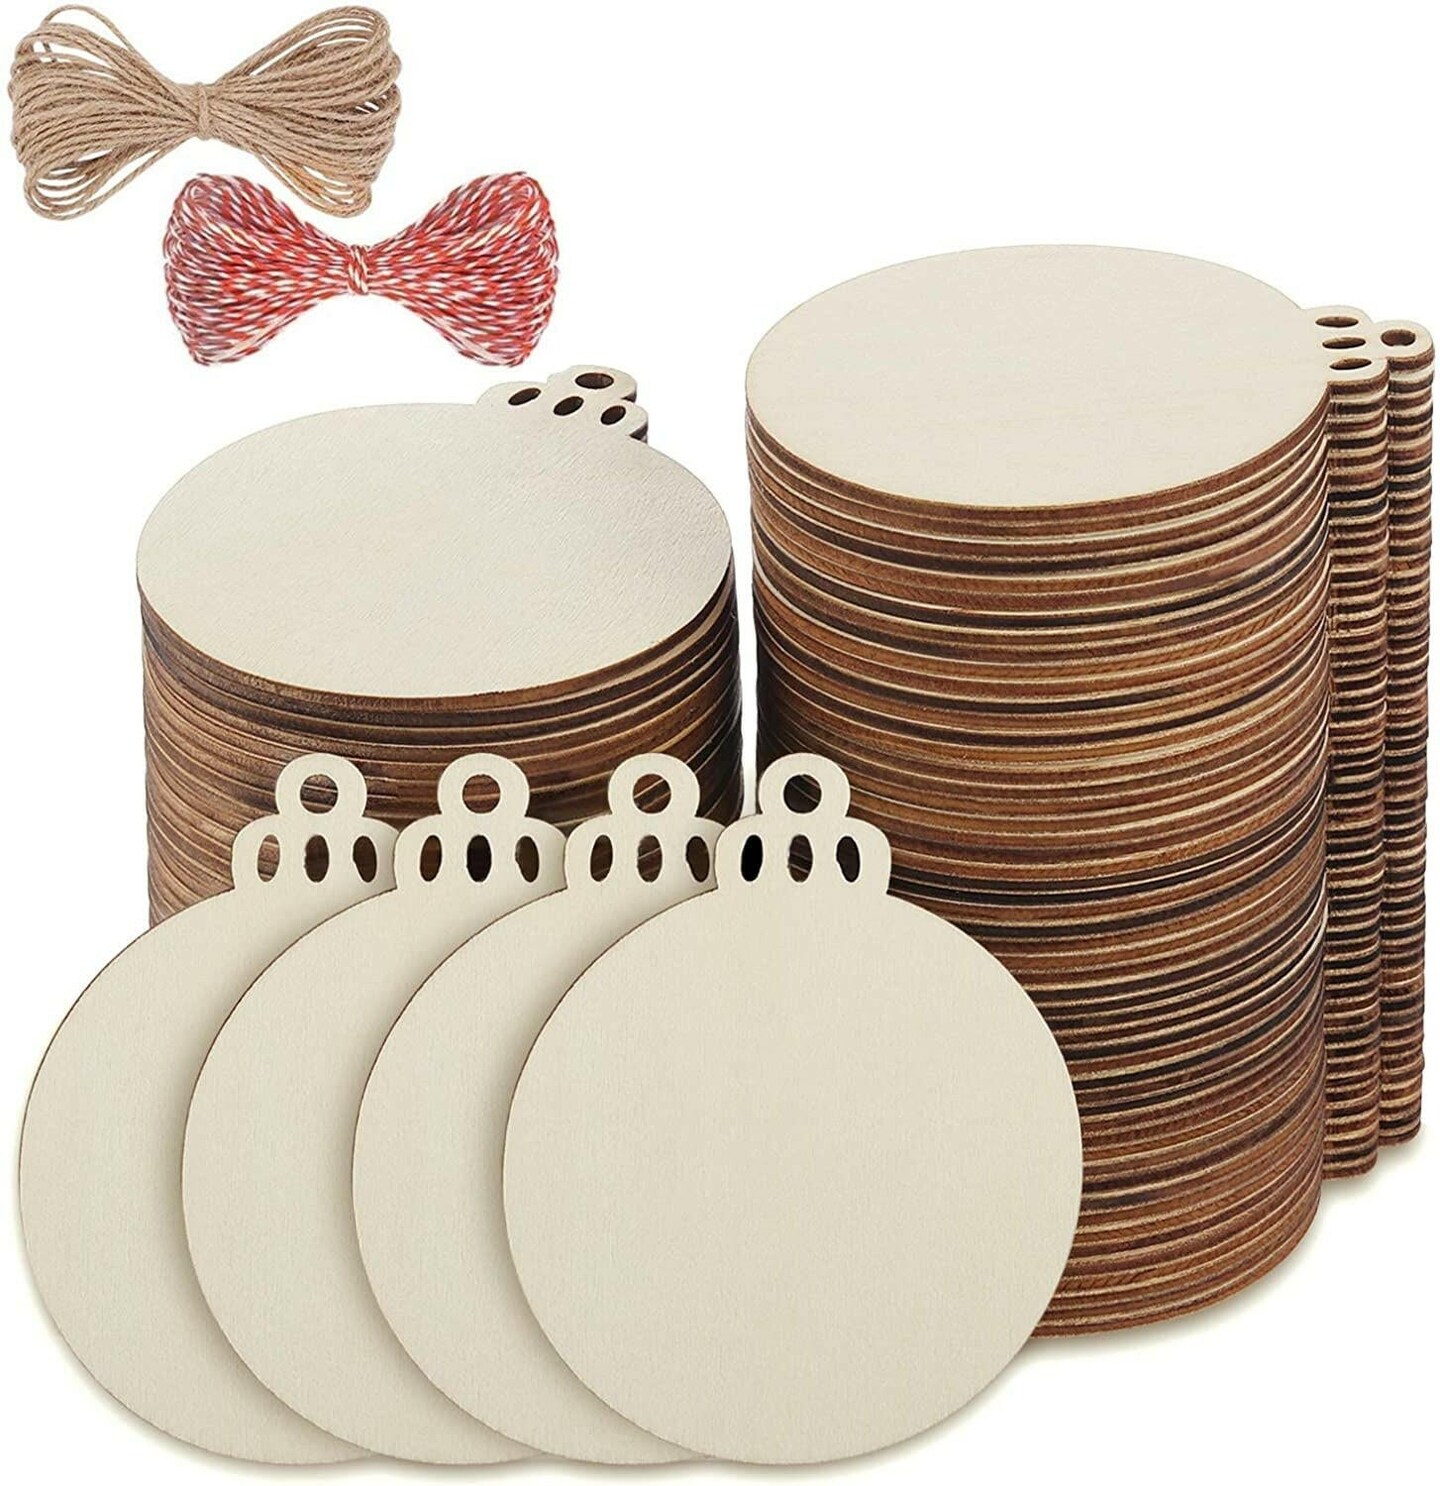 100Pcs 3.5 Inch Wooden Christmas Ornaments Unfinished Wood Slices with  Holes, Predrilled Wood round Circles Blank Discs for DIY Crafts Party  Decorations